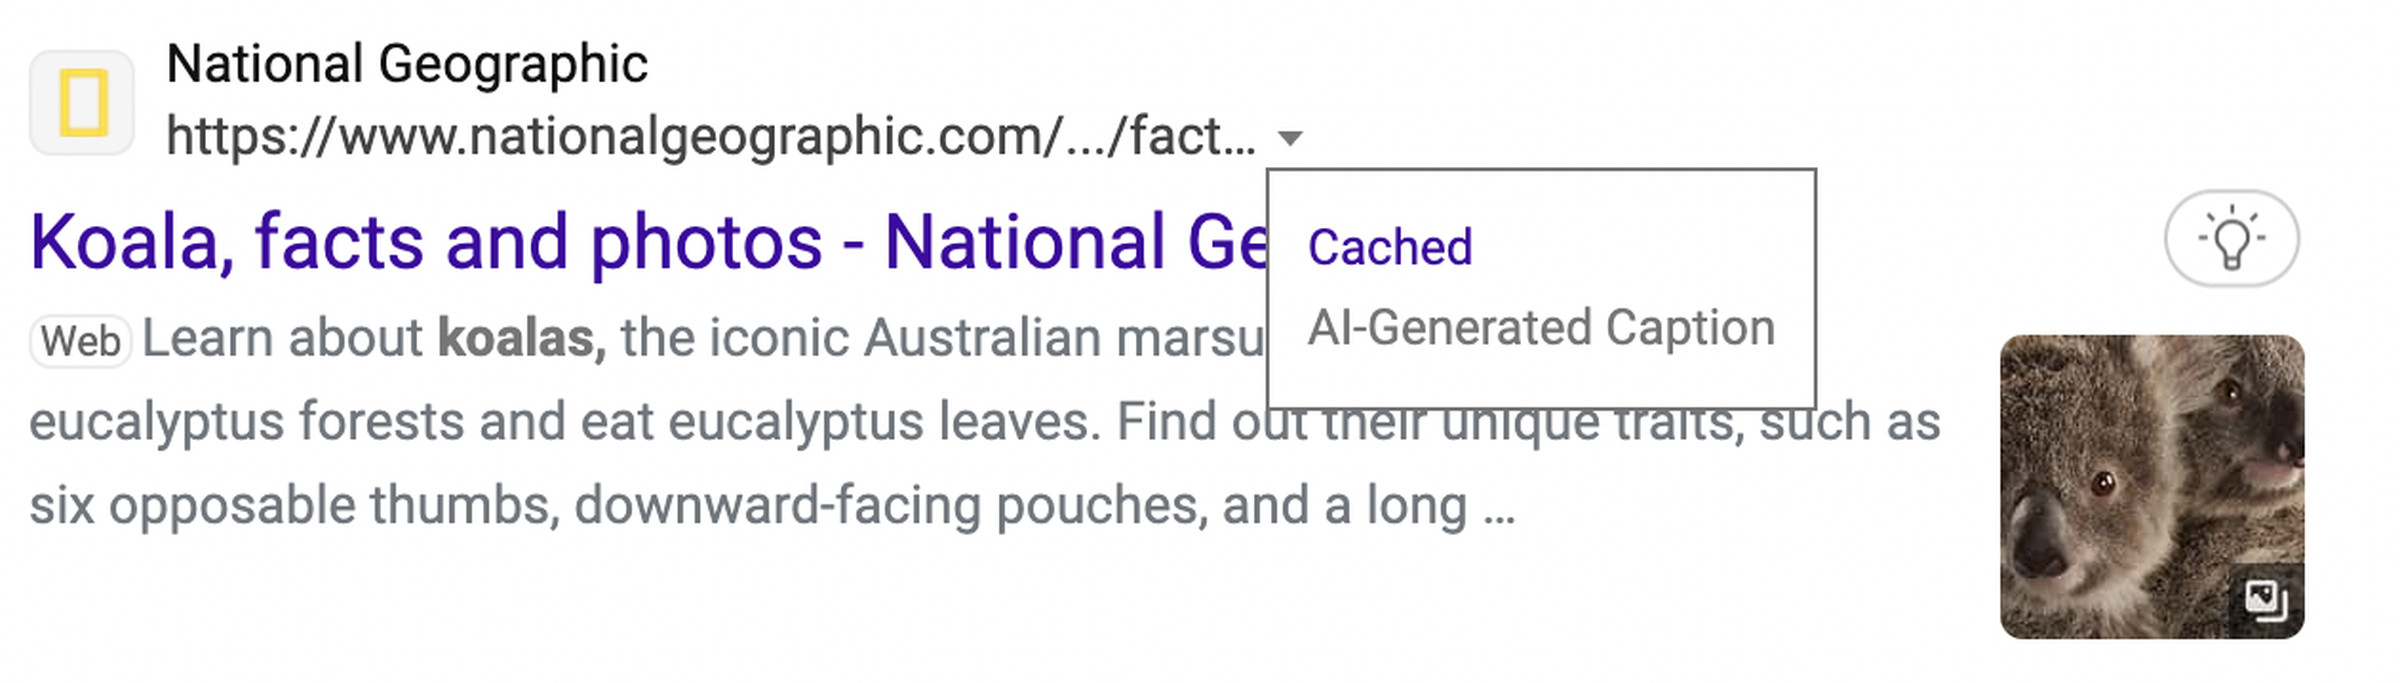 A screenshot of an AI-generated search description on Bing